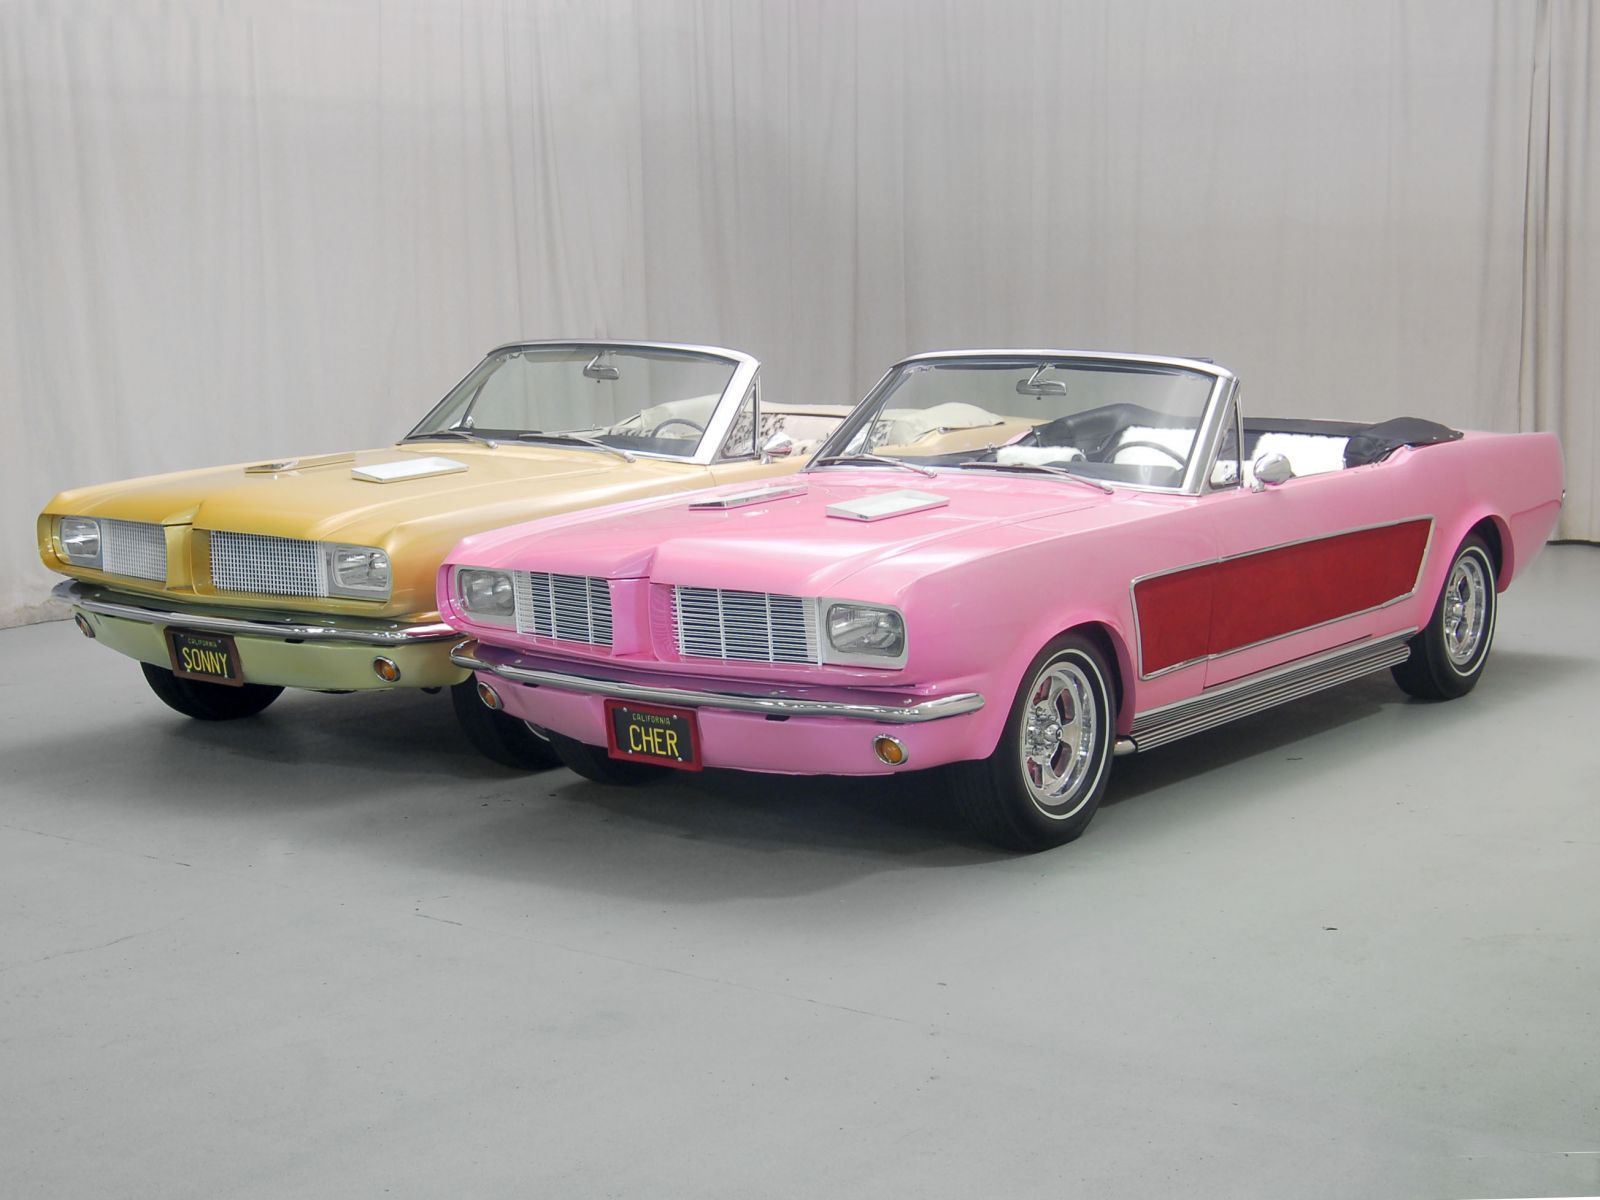 Sonny and Cher's modified Ford Mustangs